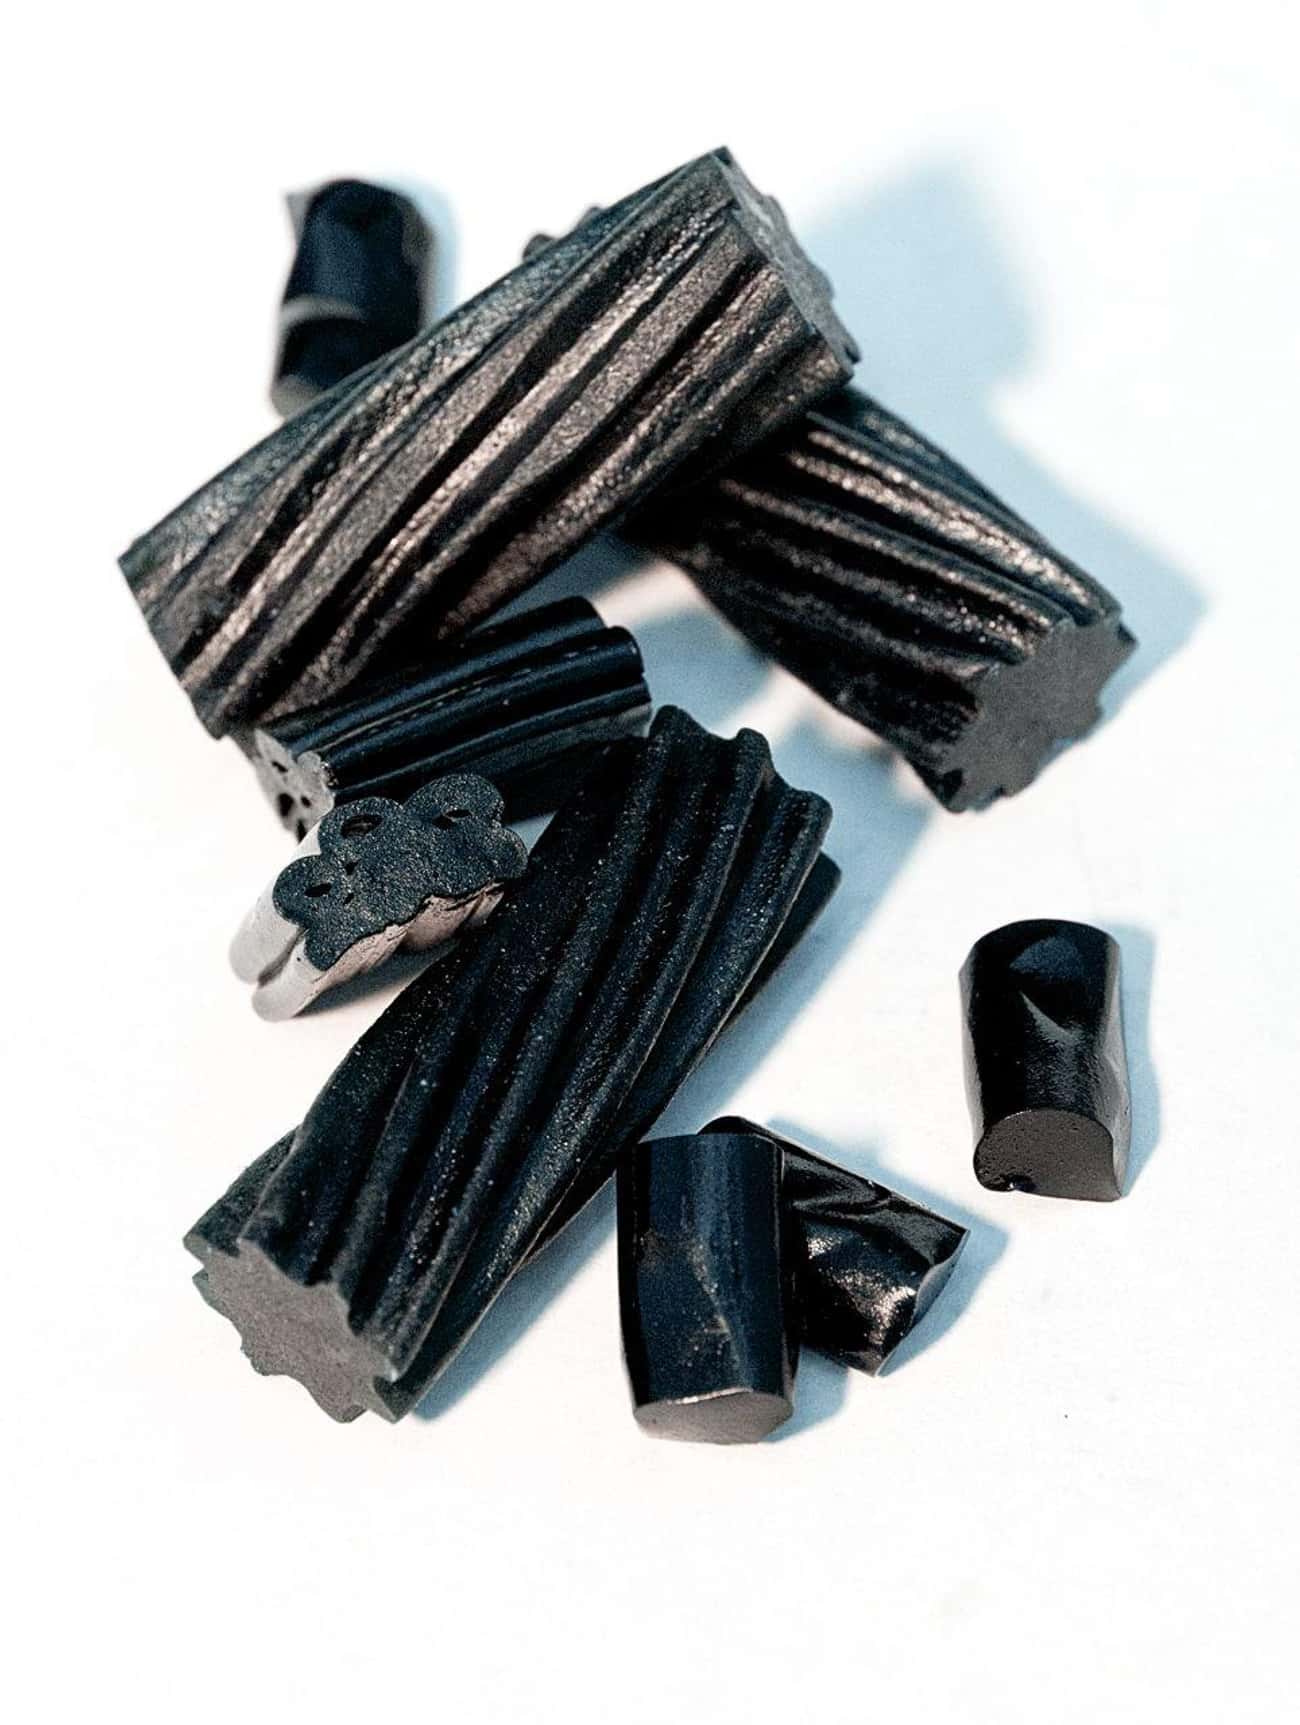 Eating Too Much Black Licorice Can Lead To Fatal Pseudohyperaldosteronism